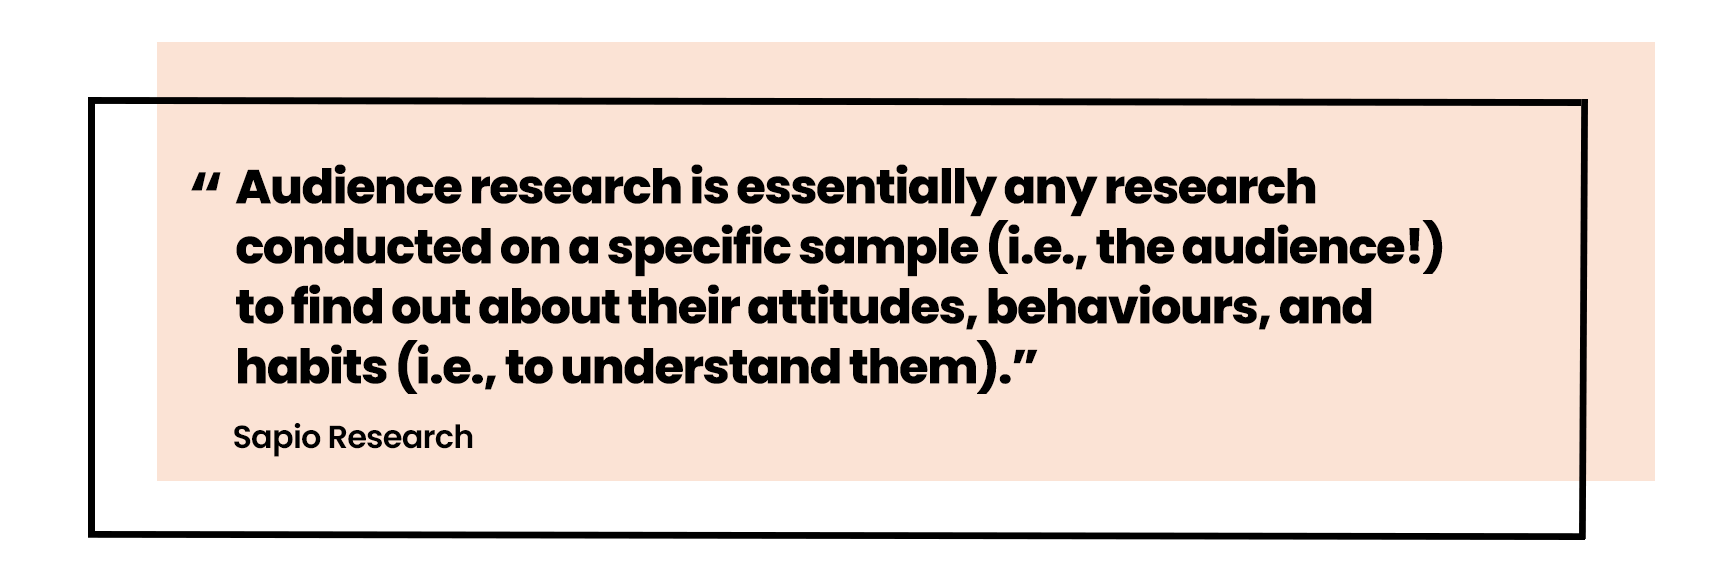 Sapio Research Audience Research quote